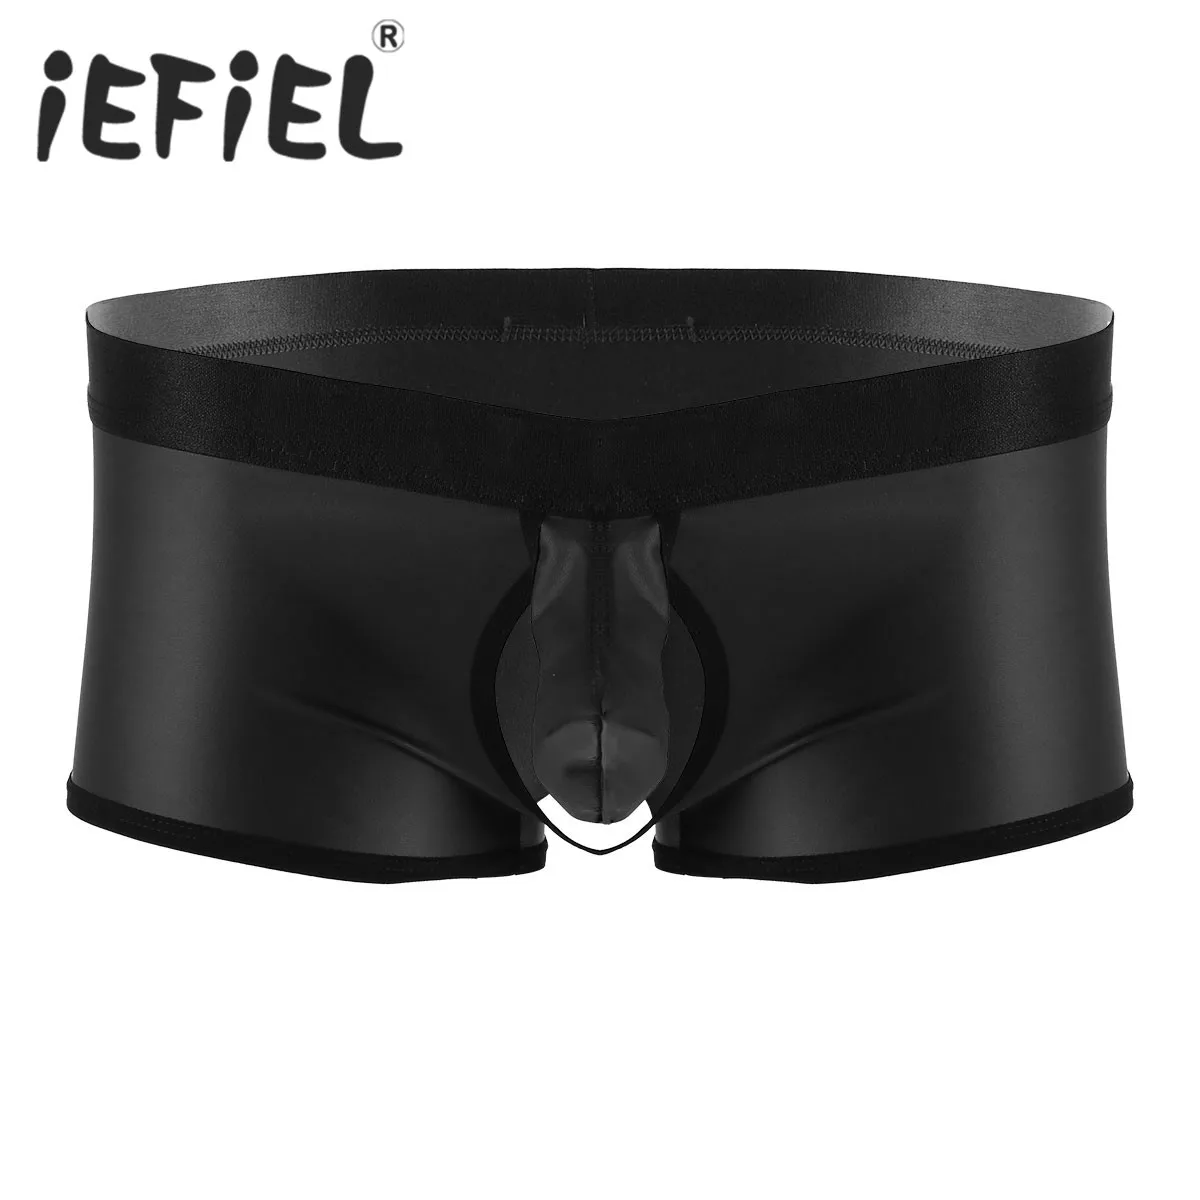 

New Arrival Sexy Male Mens Lingerie Soft Open Bulge Pouch Low Rise Boxer Underwear Underpants Things with Closed Penis Sheath